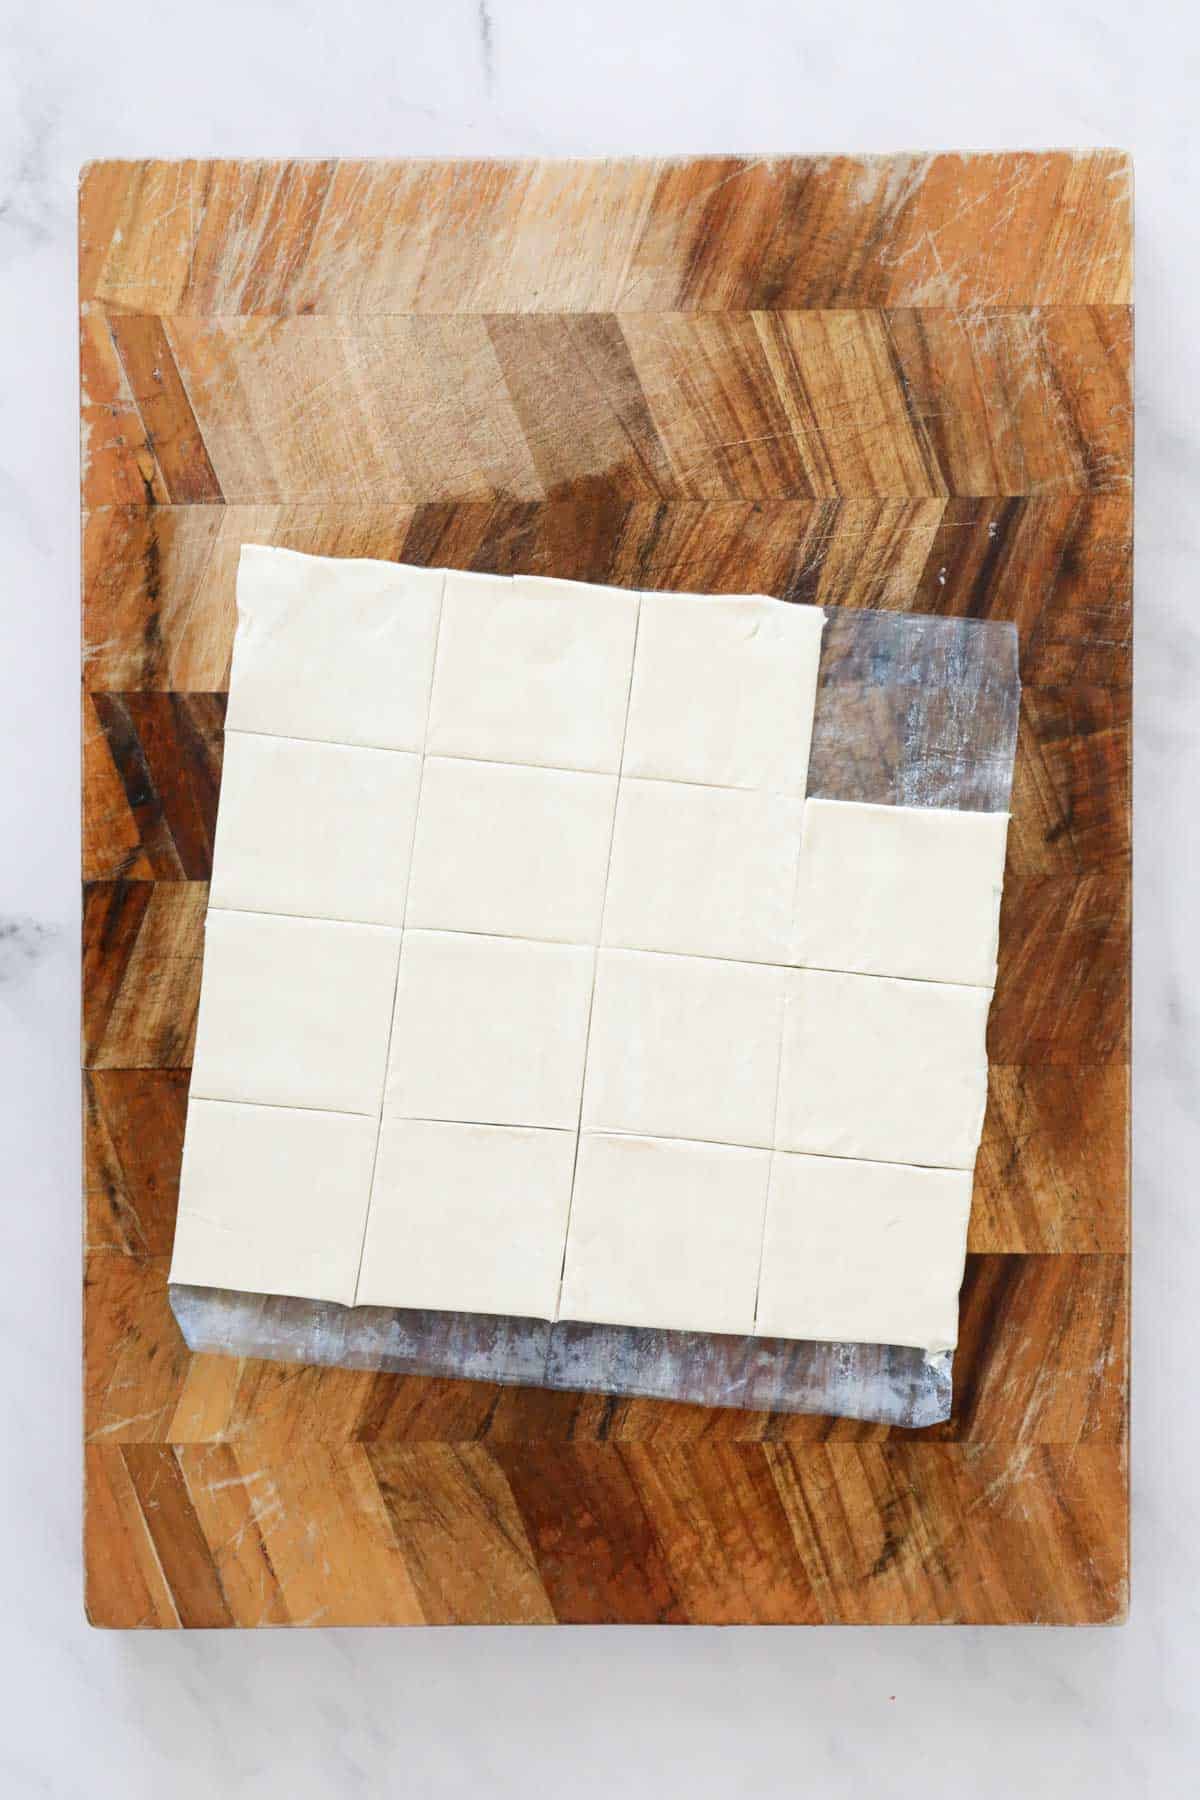 A puff pastry sheet cut into small squares